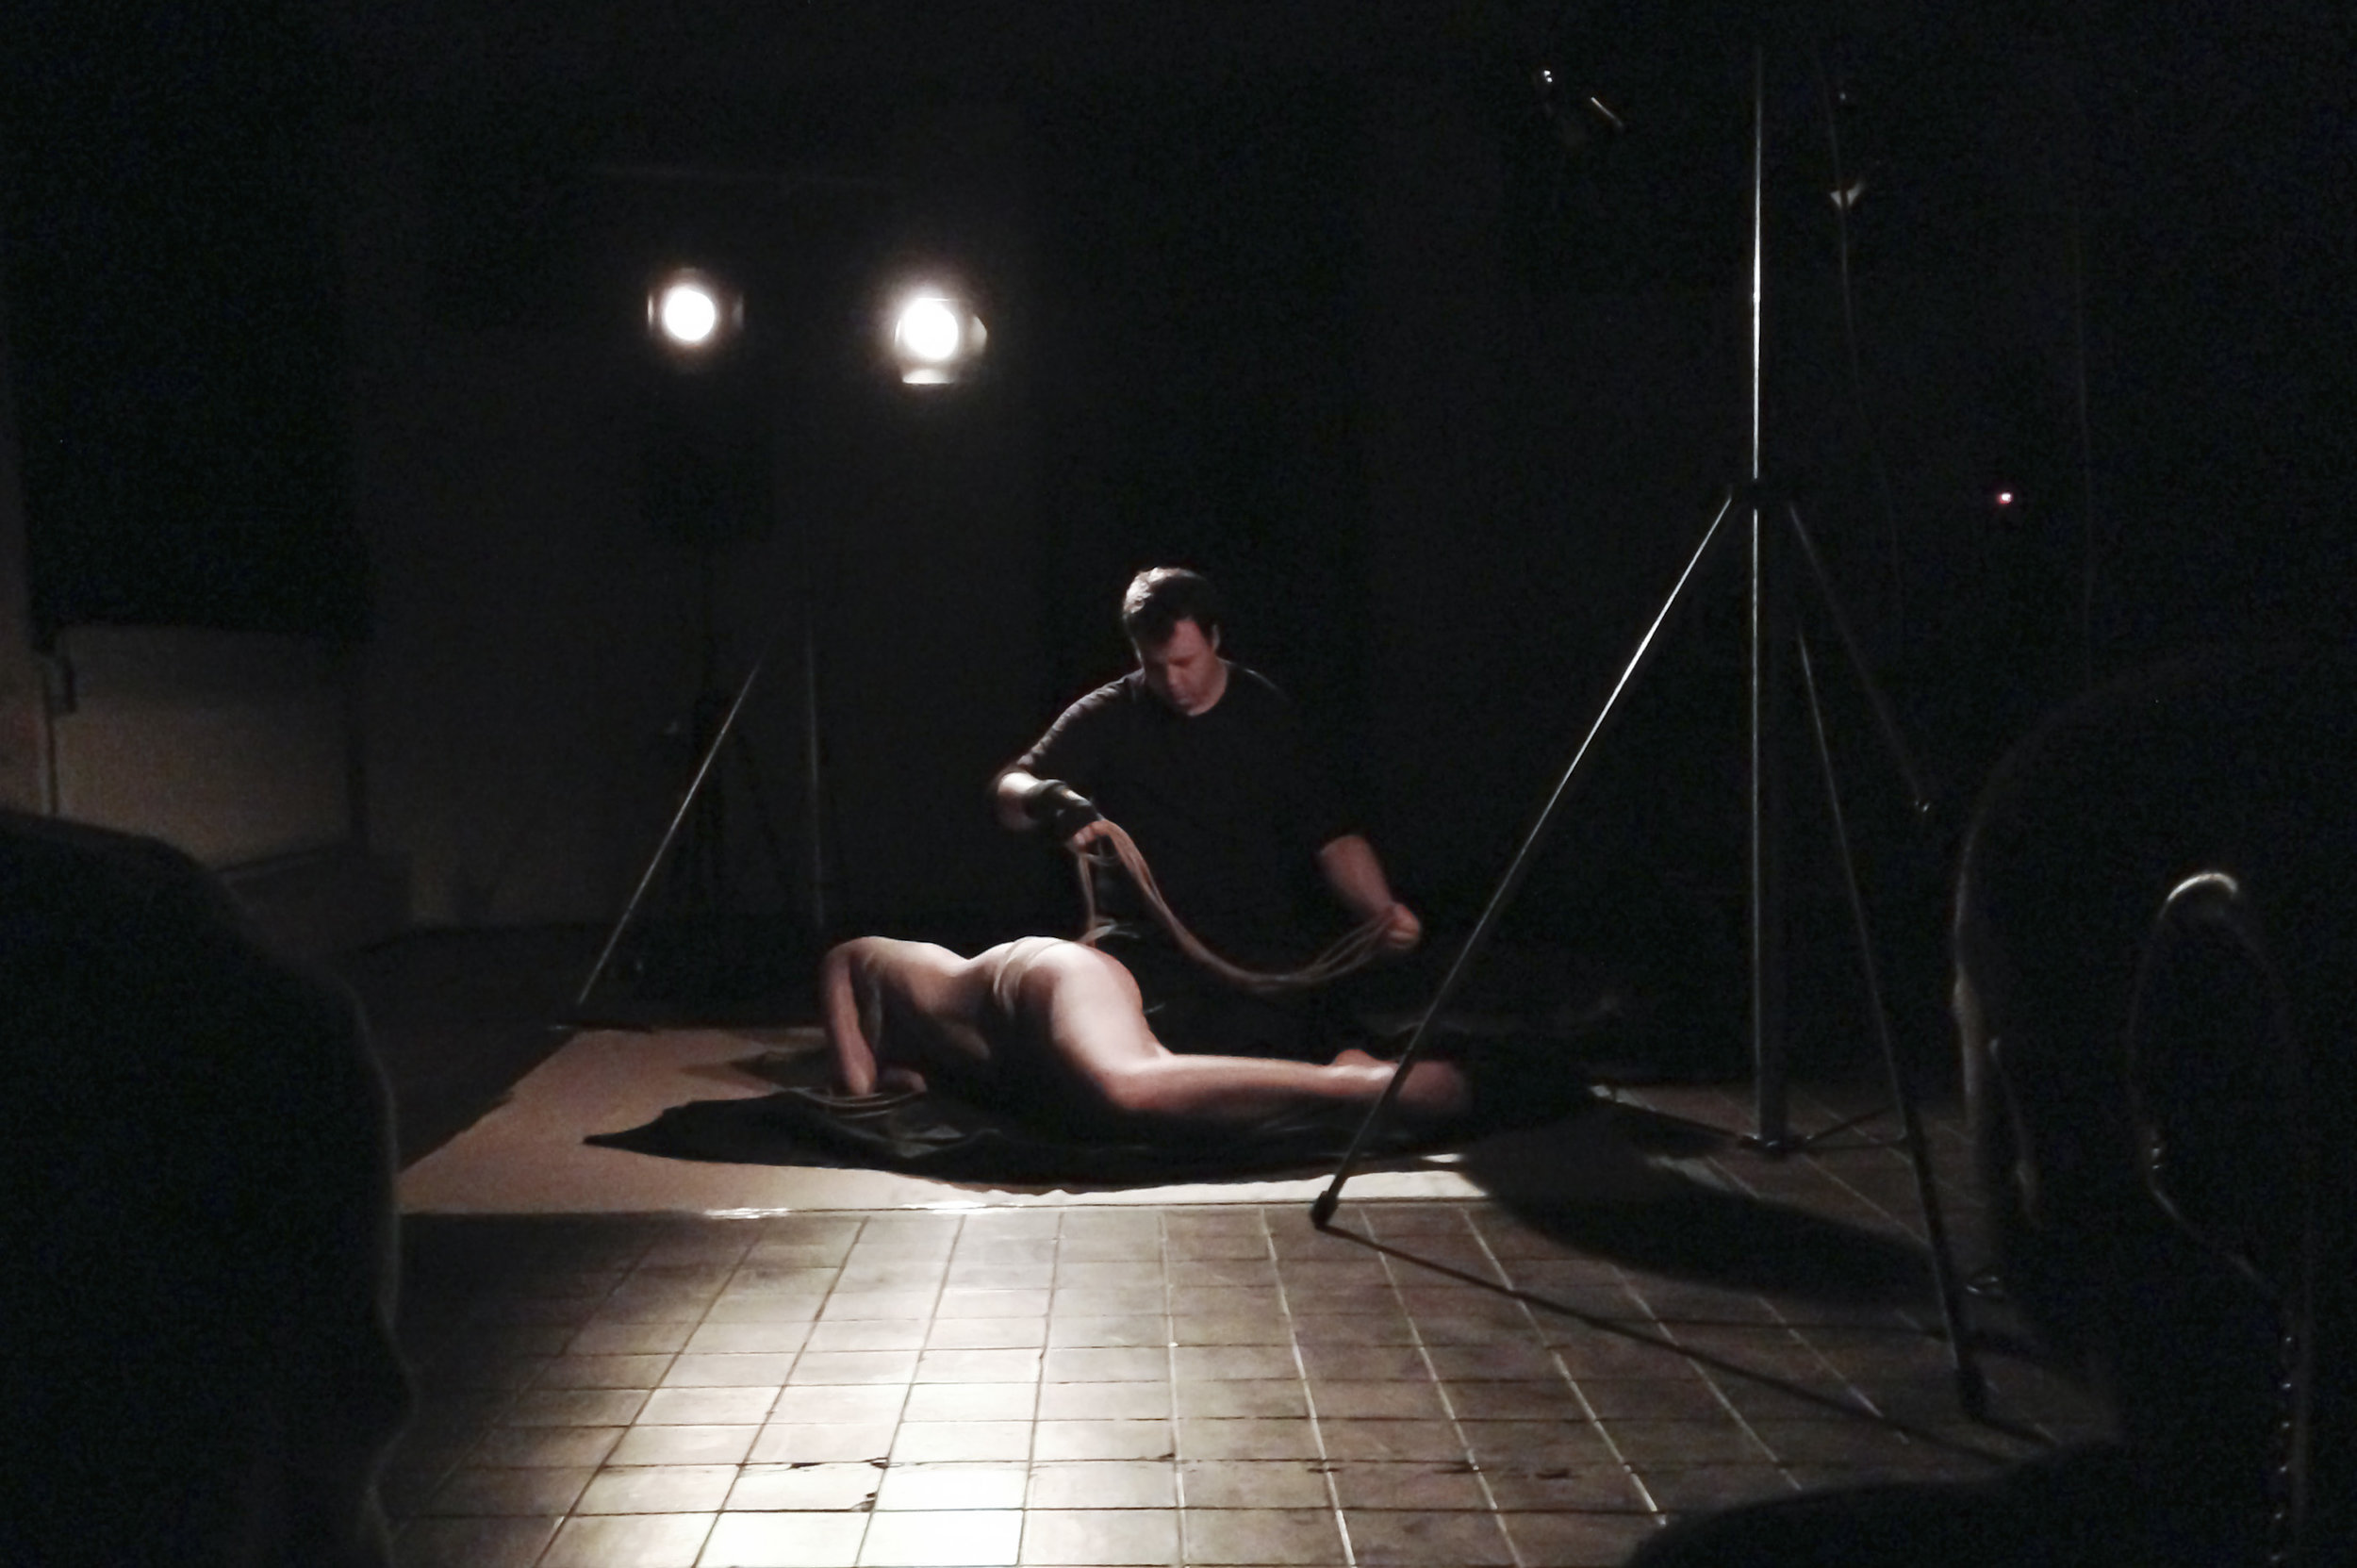 ORIGIN: A PERFORMANCE FOR TWO BODIES